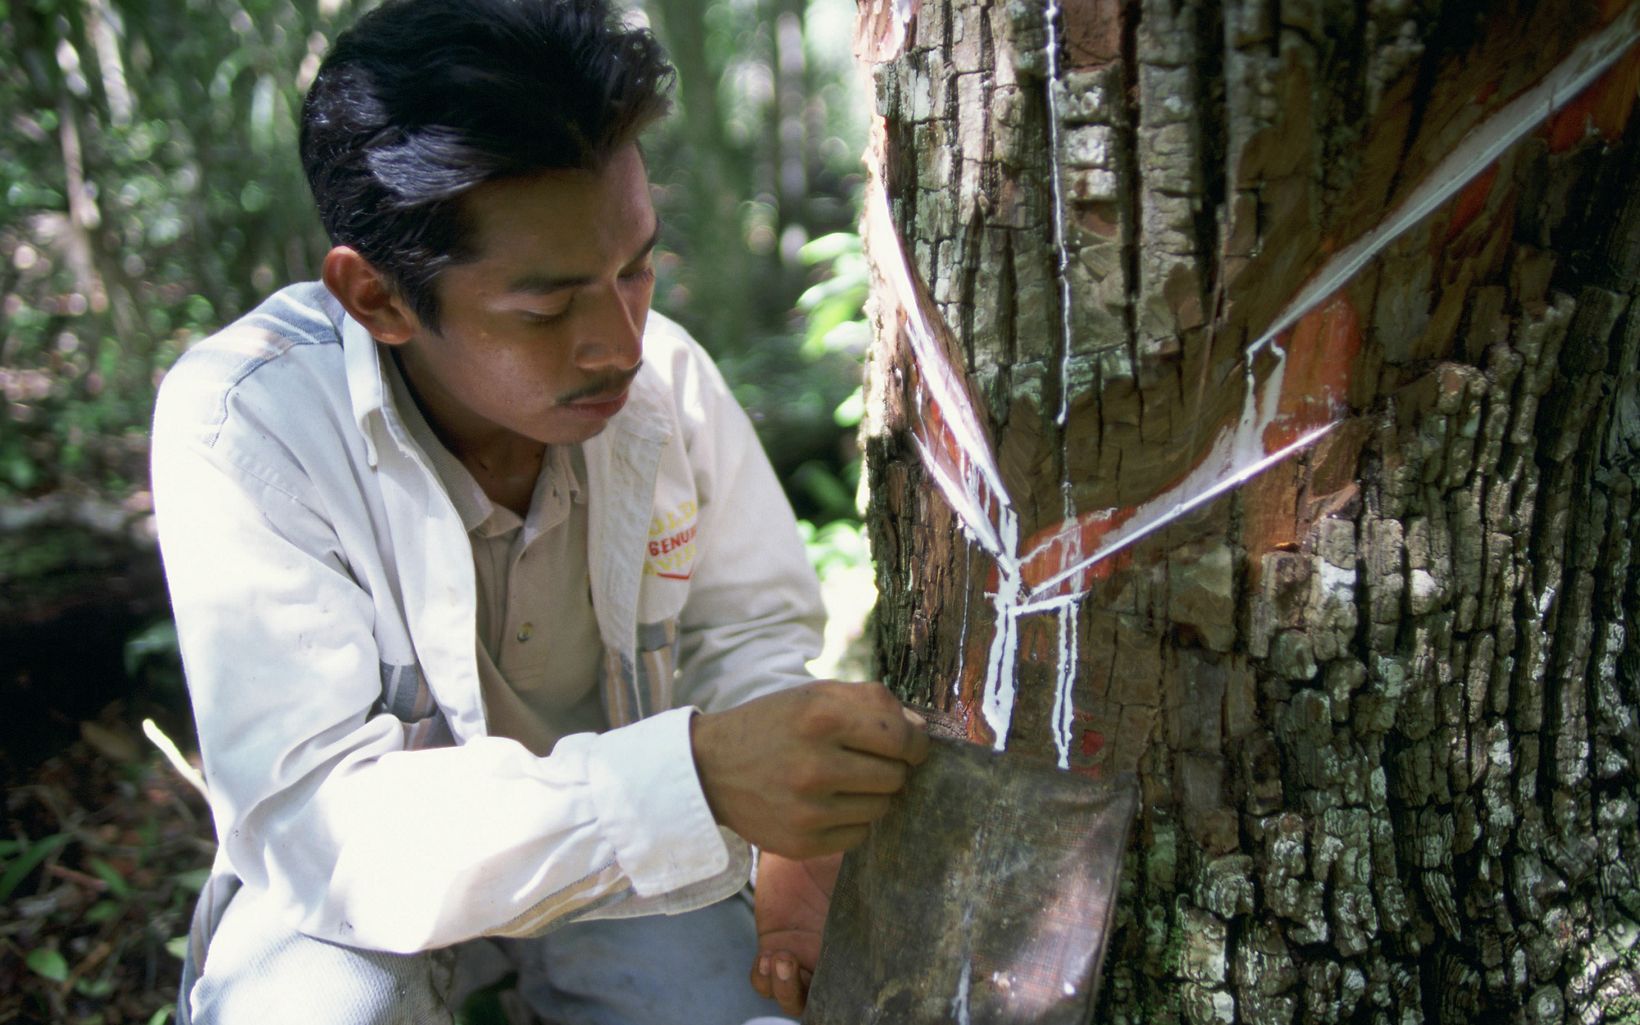 taps sap from a gum tree in the Maya forest along the edge of Mexico's Calakmul Biosphere Reserve.